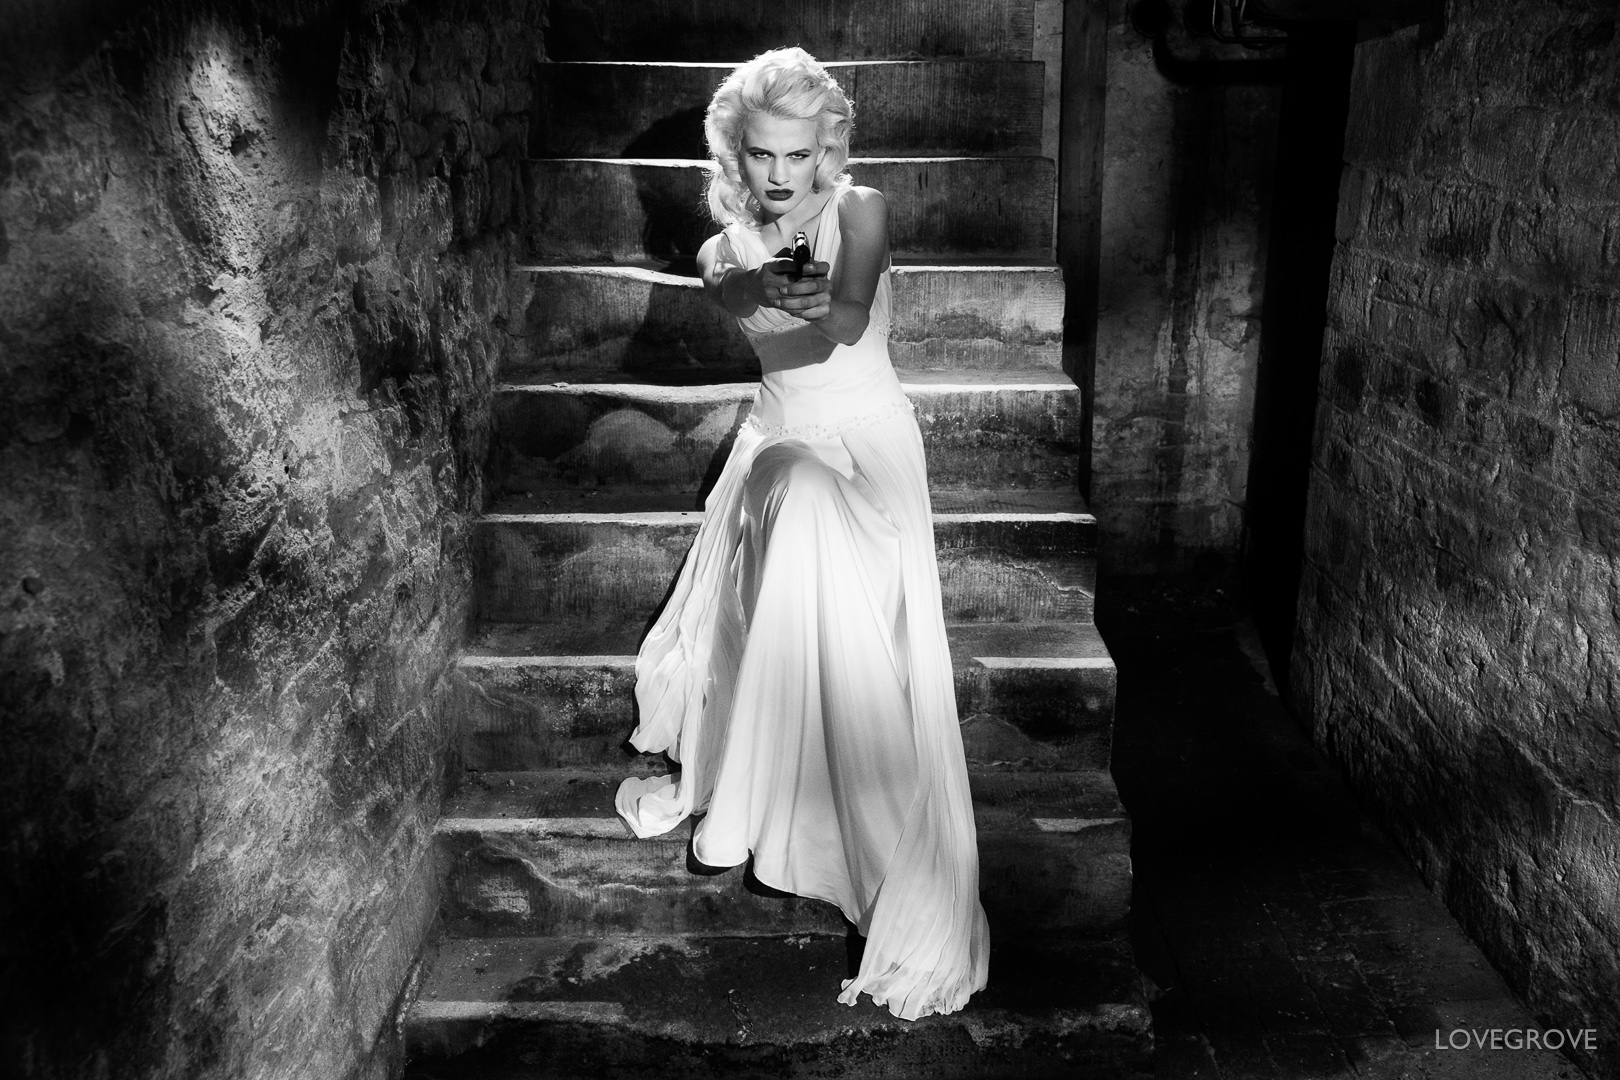 Chloe-Jasmine Whichello on the cellar stairs with a Walther PPK hand gun.